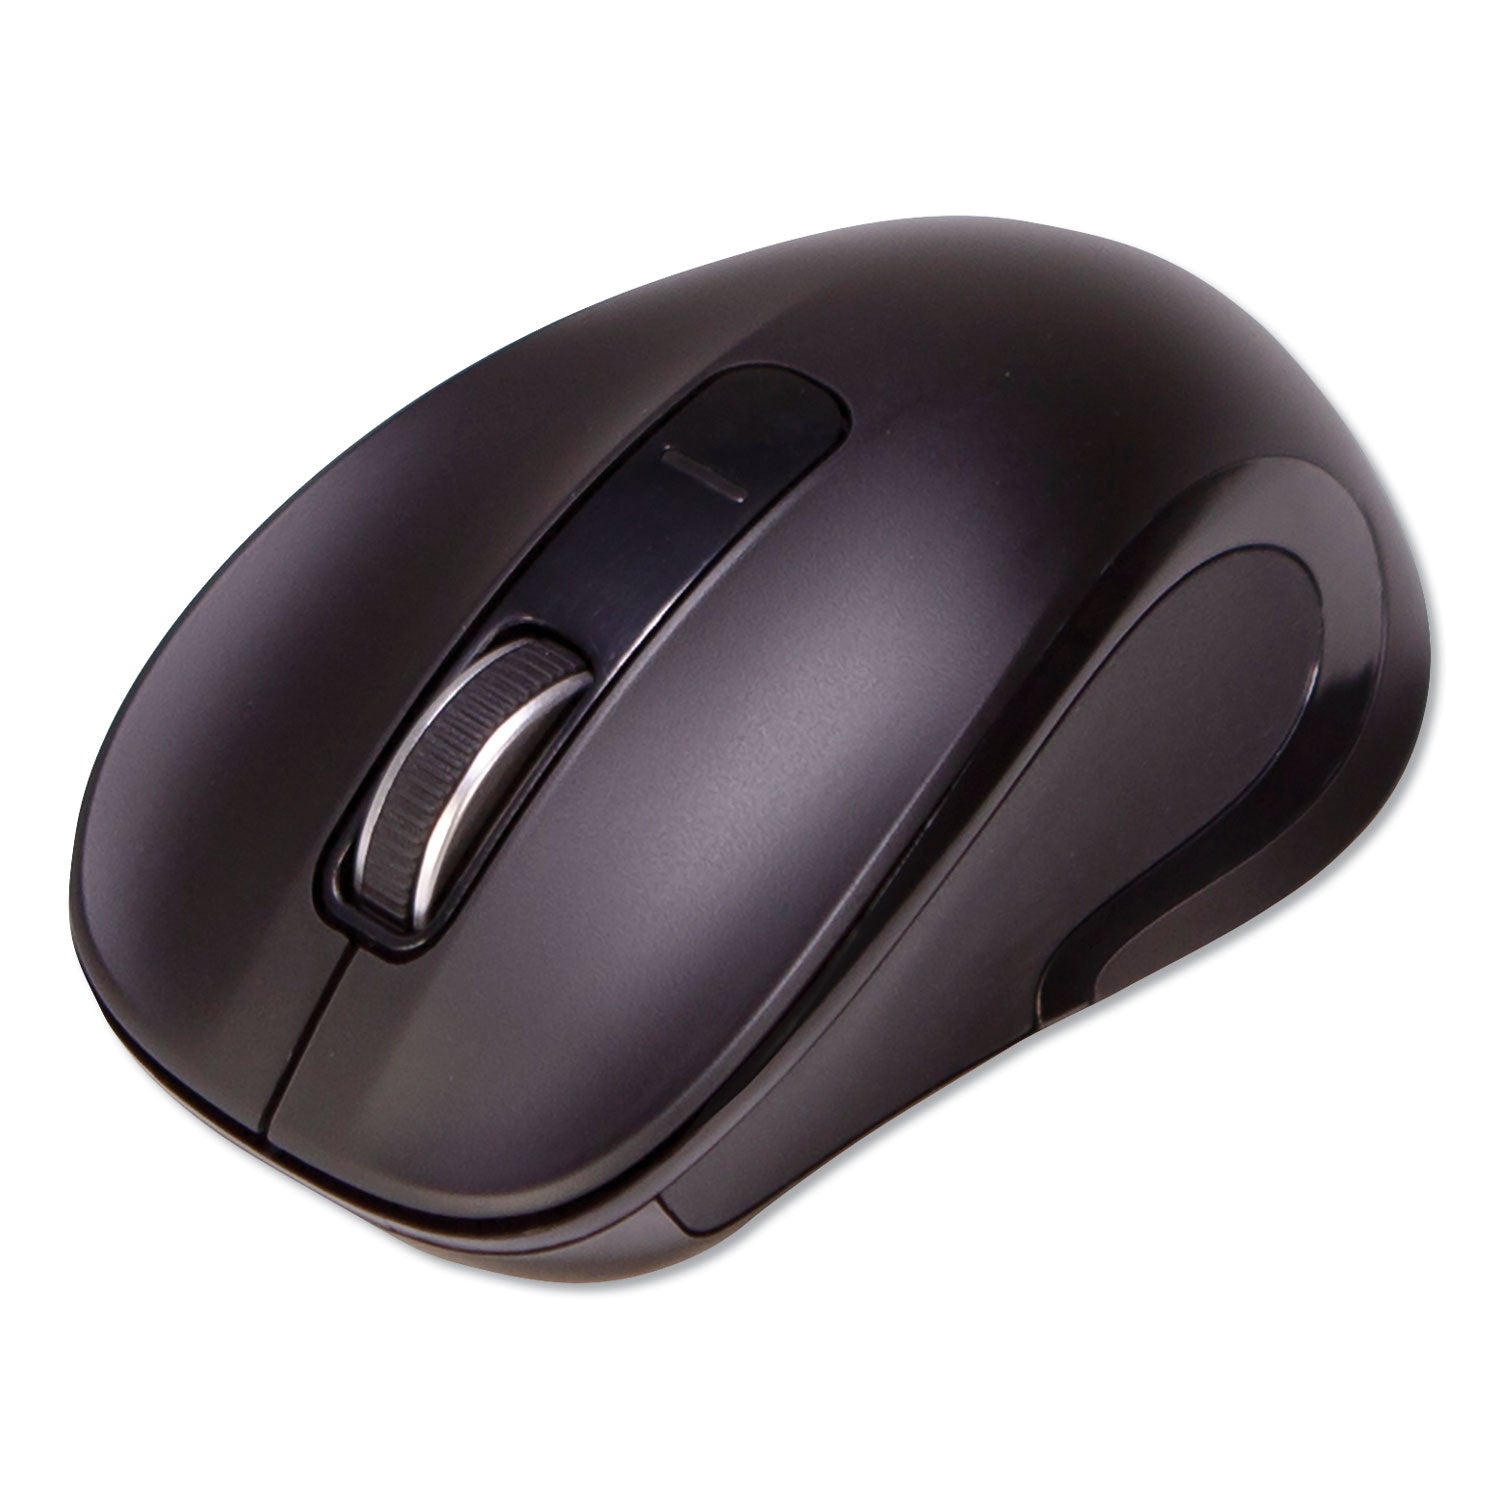 mid-size-wireless-optical-mouse-with-micro-usb-24-ghz-frequency-26-ft-wireless-range-right-hand-use-black_ivr61500 - 2